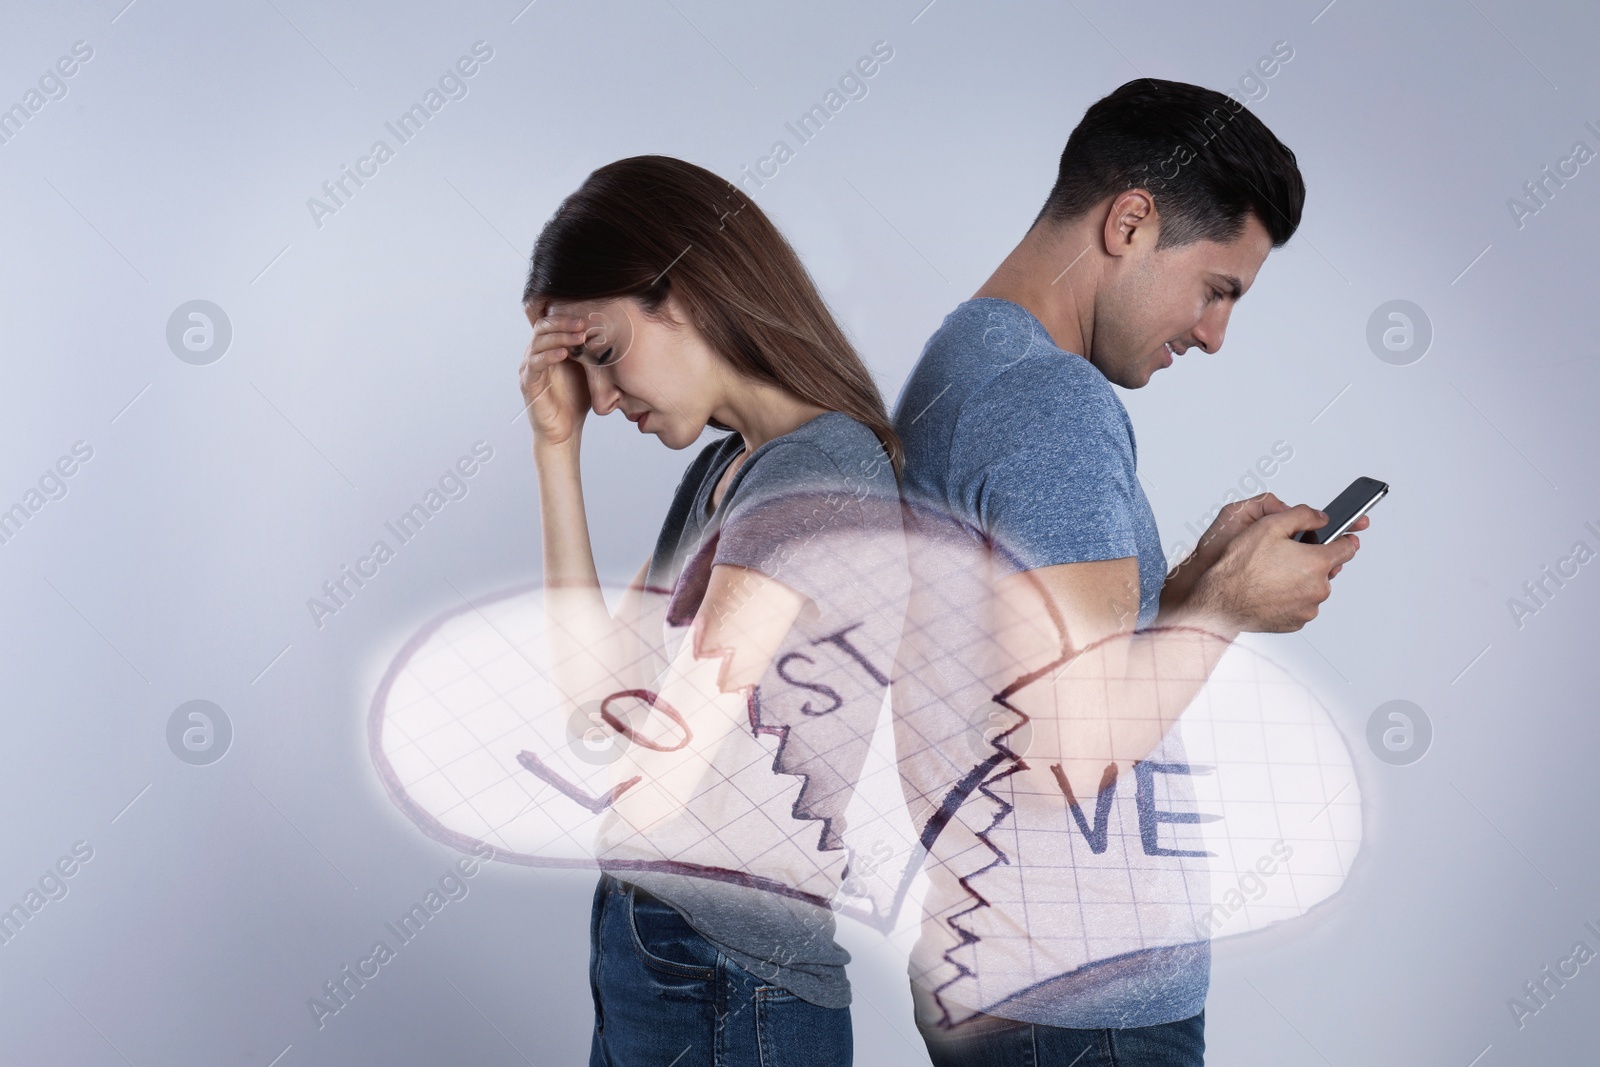 Image of Double exposure of couple with relationship problems and broken paper heart